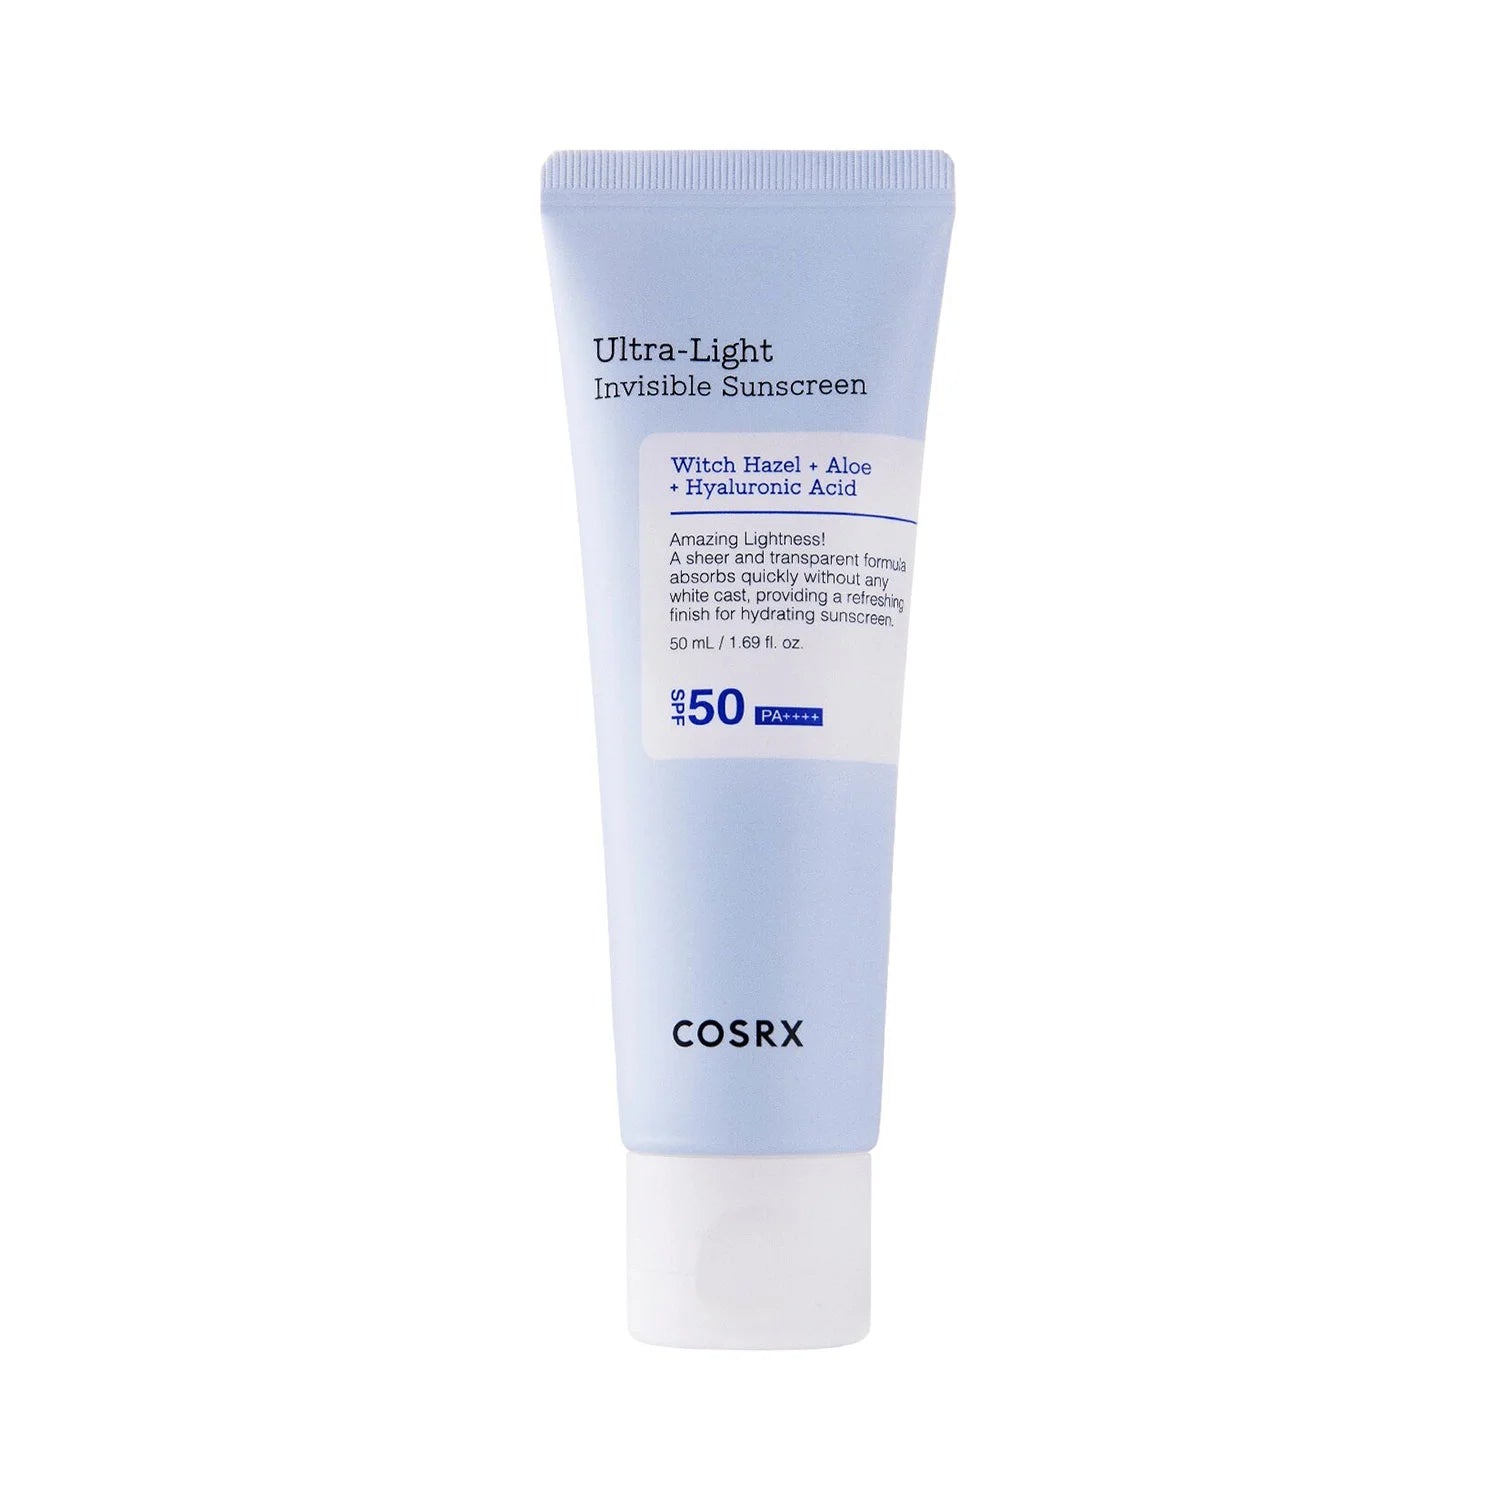 Cosrx Ultra-Light Invisible Sunscreen SPF50 PA++++ for all skin types dry combination acne prone sensitive skin men women all ages K Beauty World